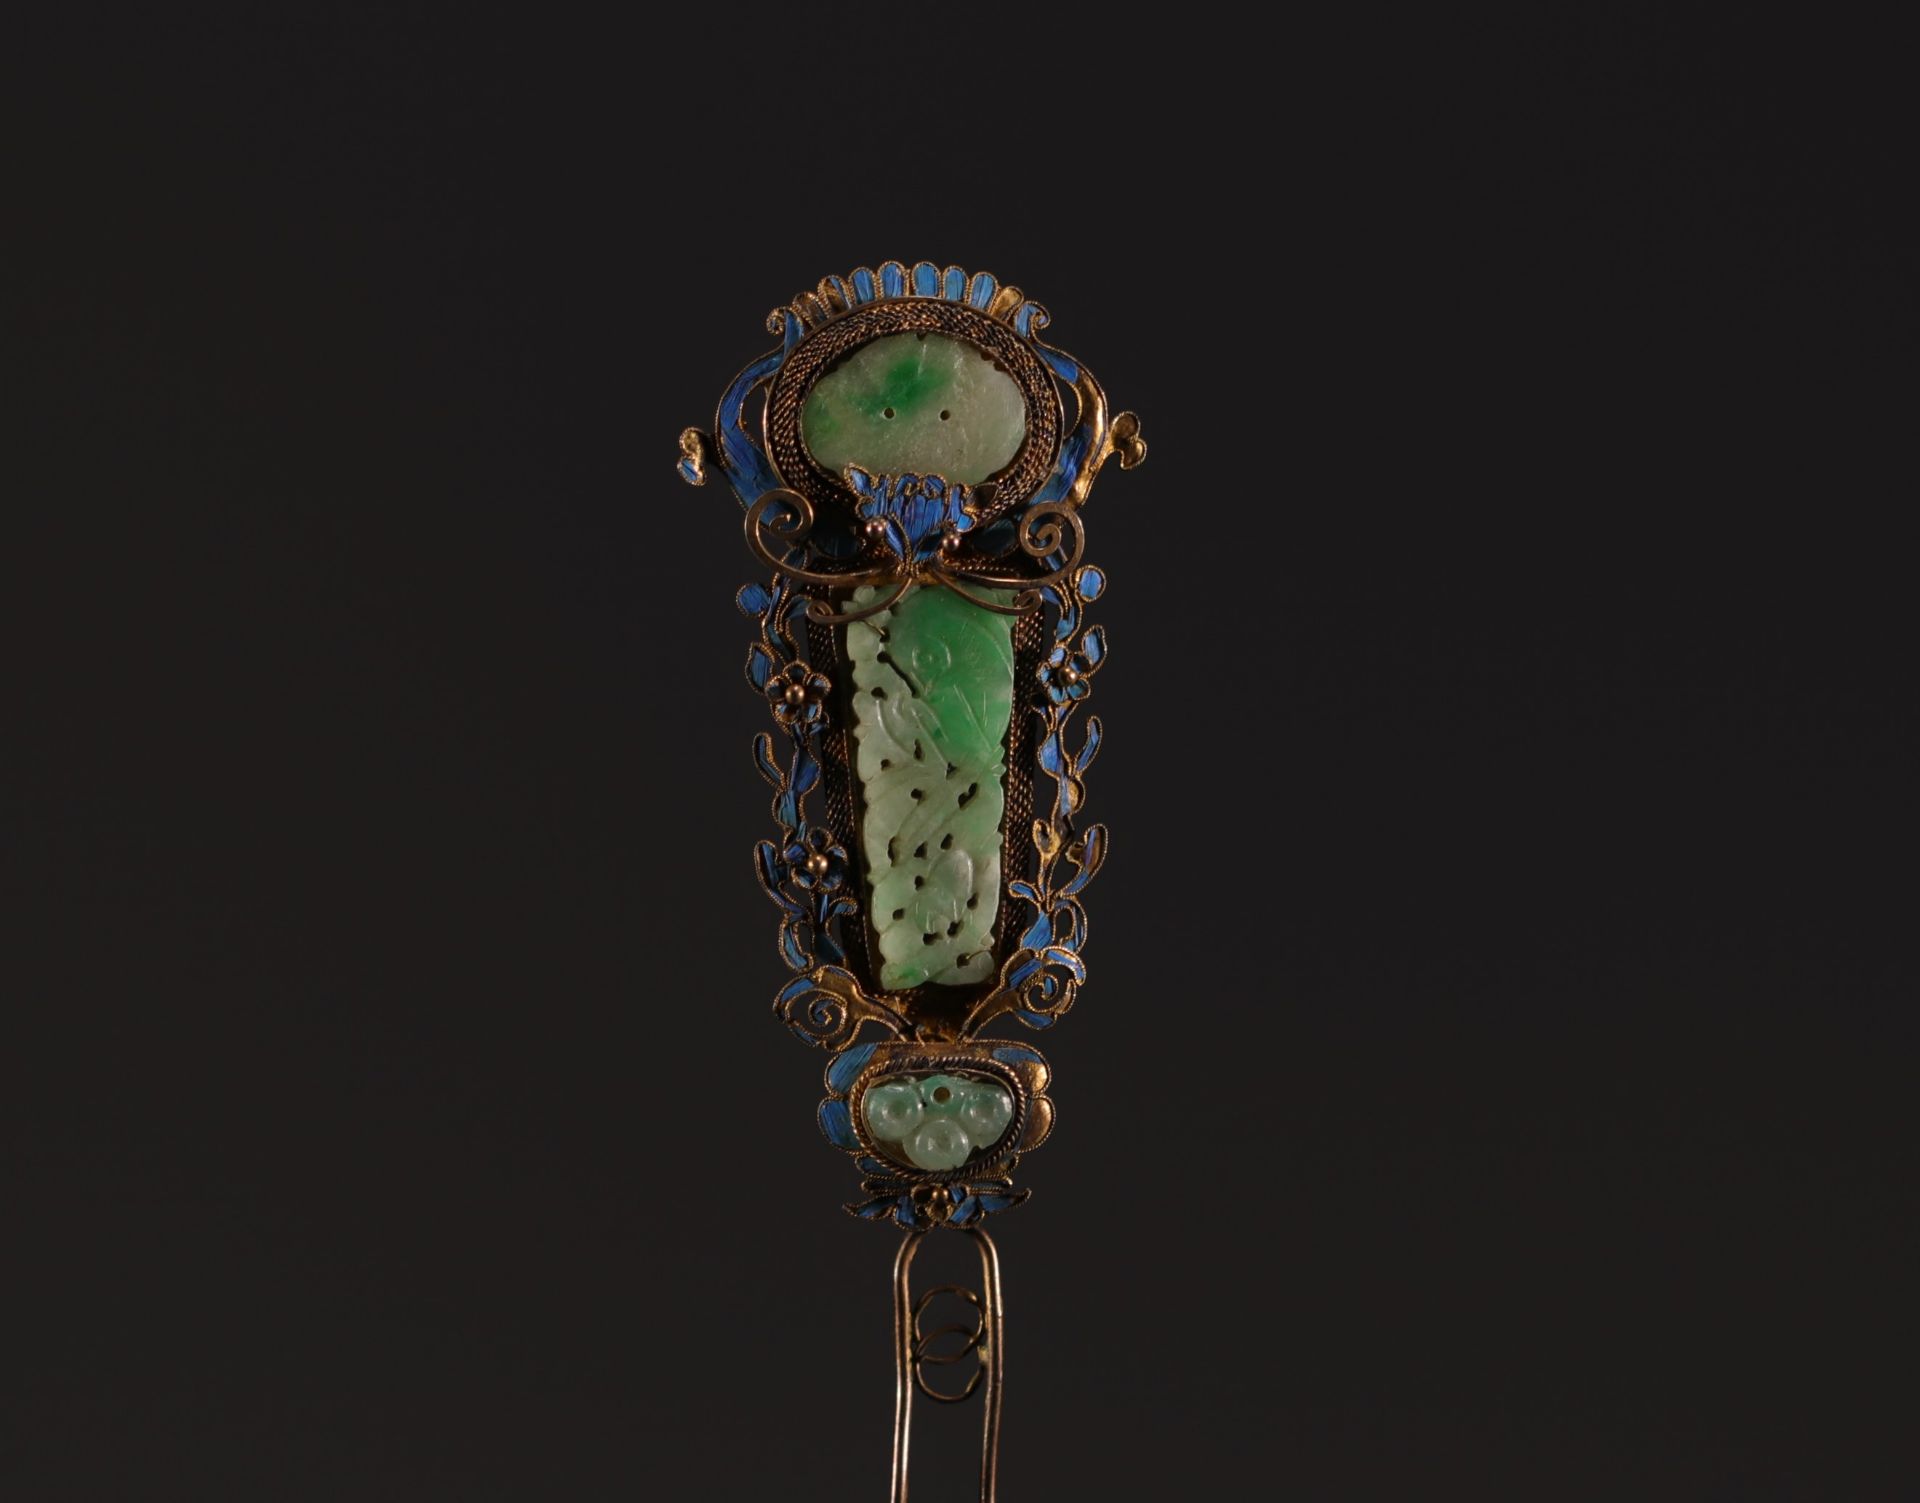 China - Cloisonne enamel and green jade hairpin with feather design, Qing period.